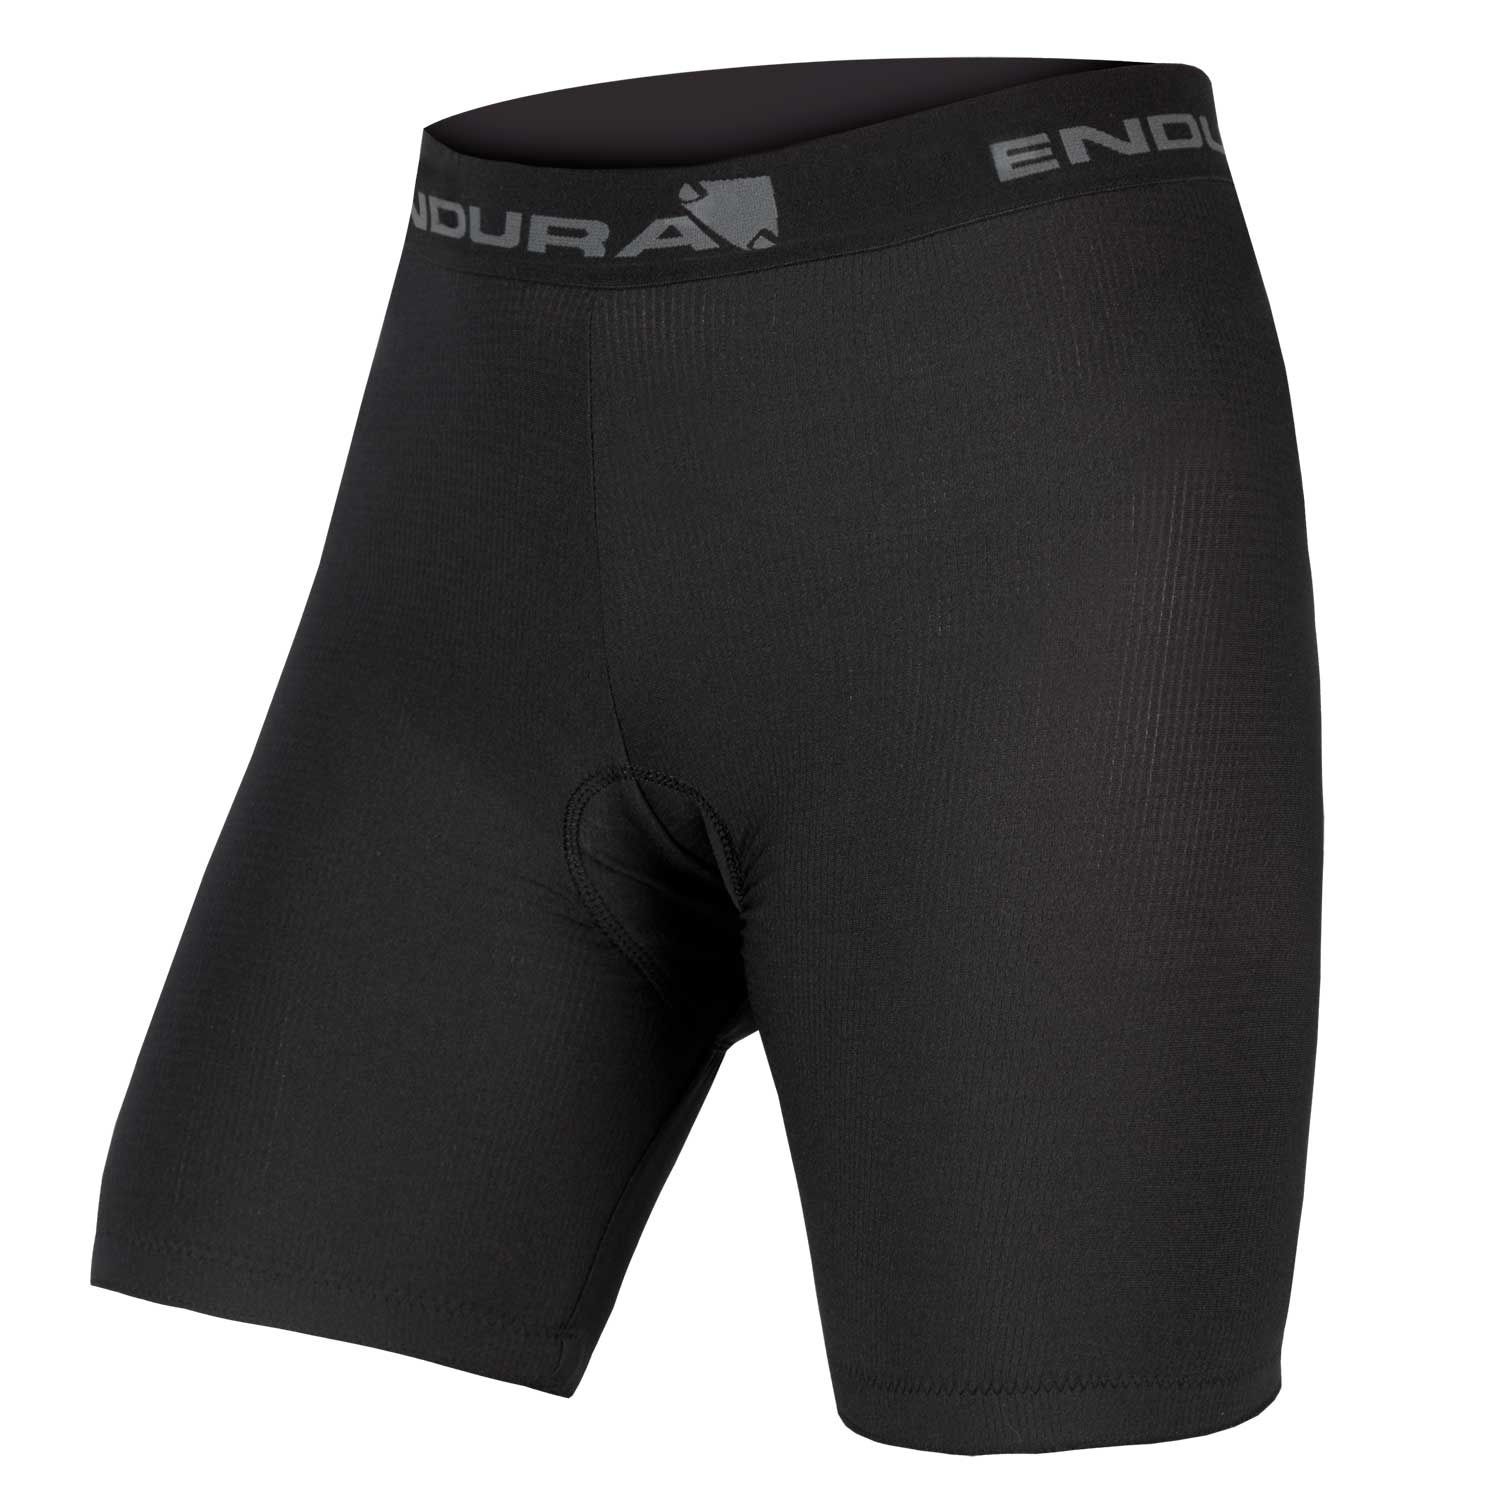 womens mtb shorts with padded liner